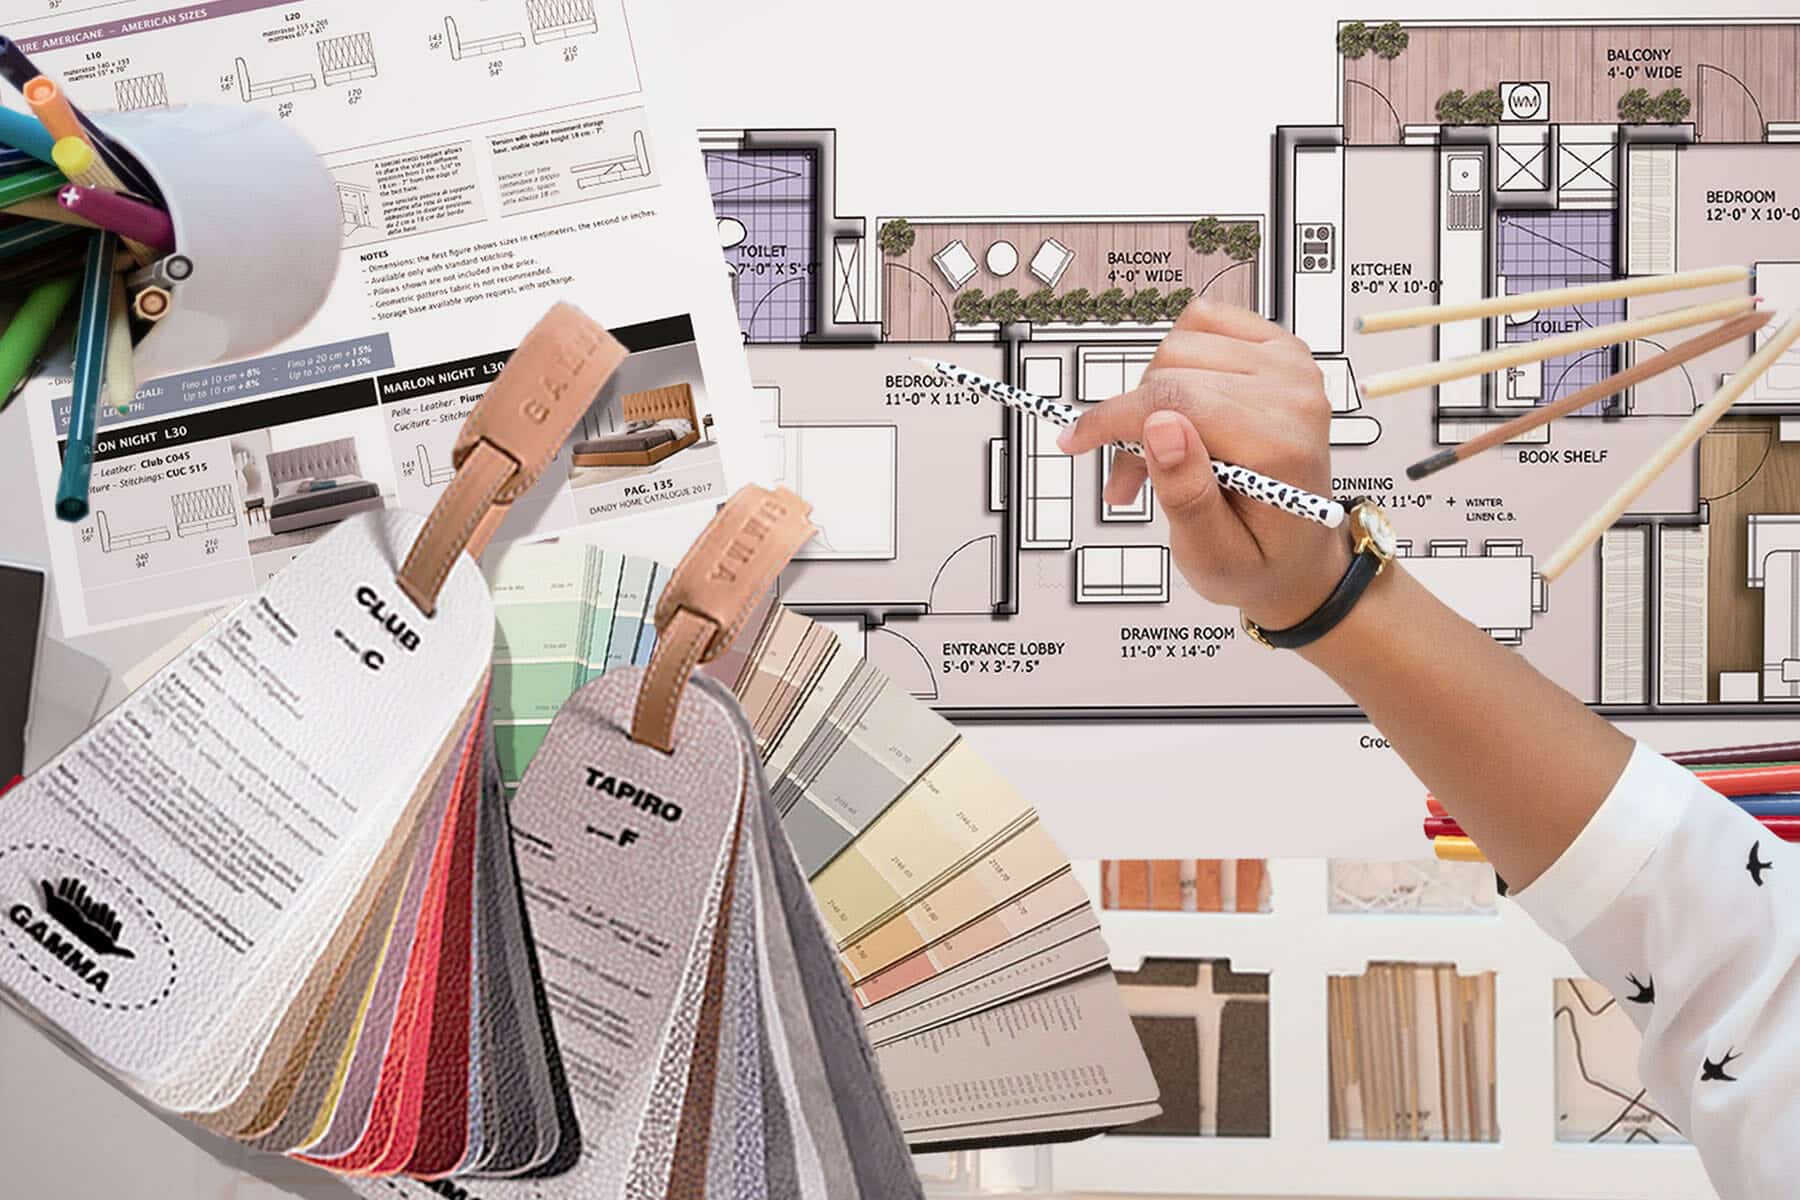 E Design Interior Design Blueprints, Color Swatches, and colored markers.